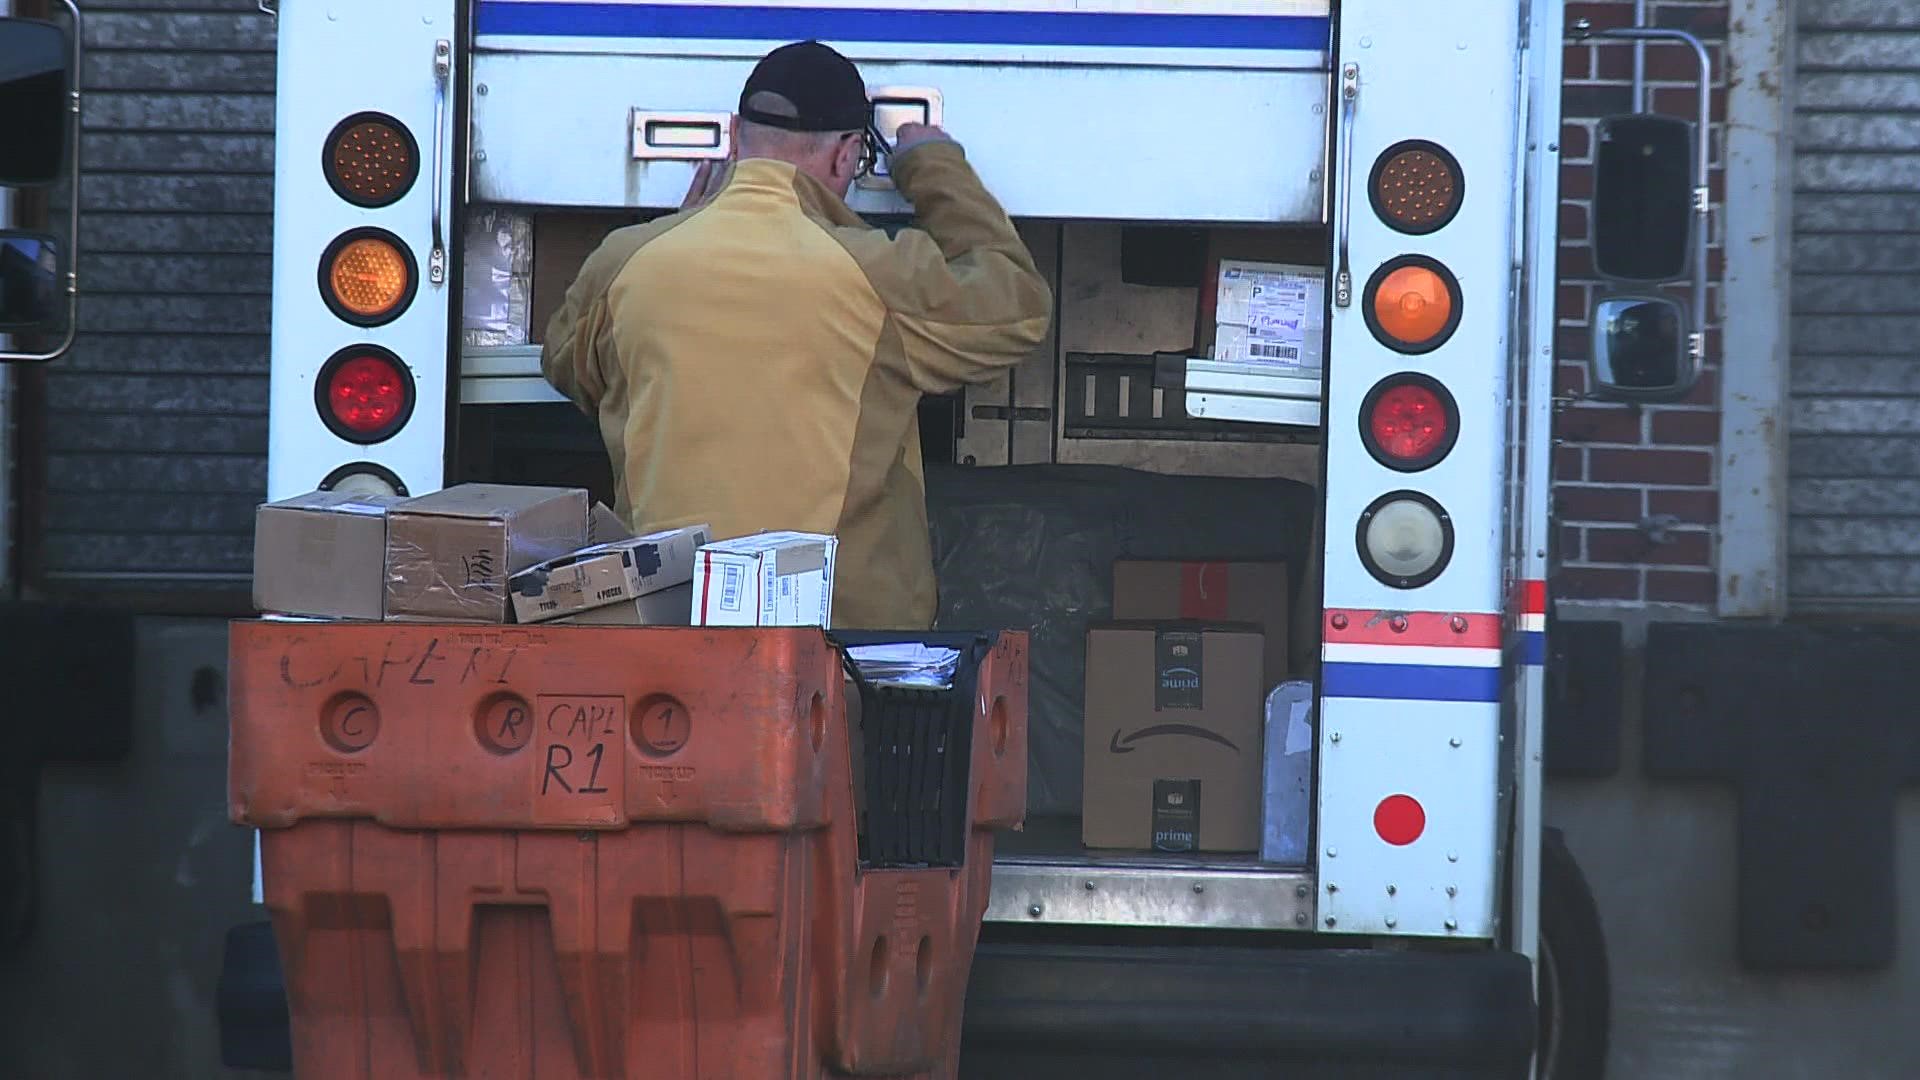 Maine people say they are having problems with their mail being delayed, dropped off at the wrong house, or not being delivered at all.